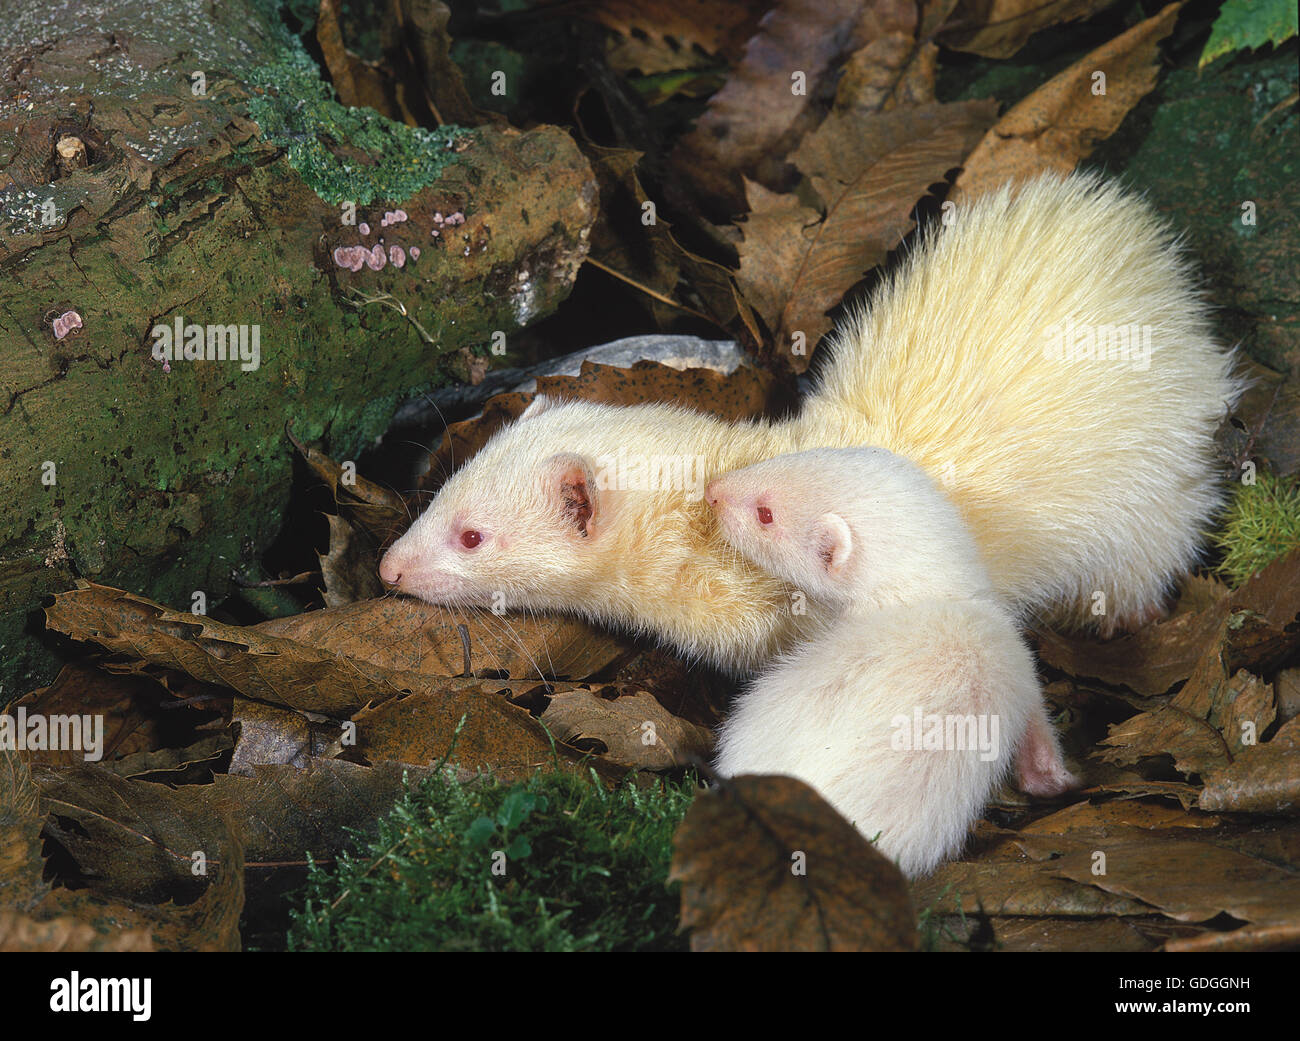 Ferret, mustela putorius furo, Mother with Young Stock Photo